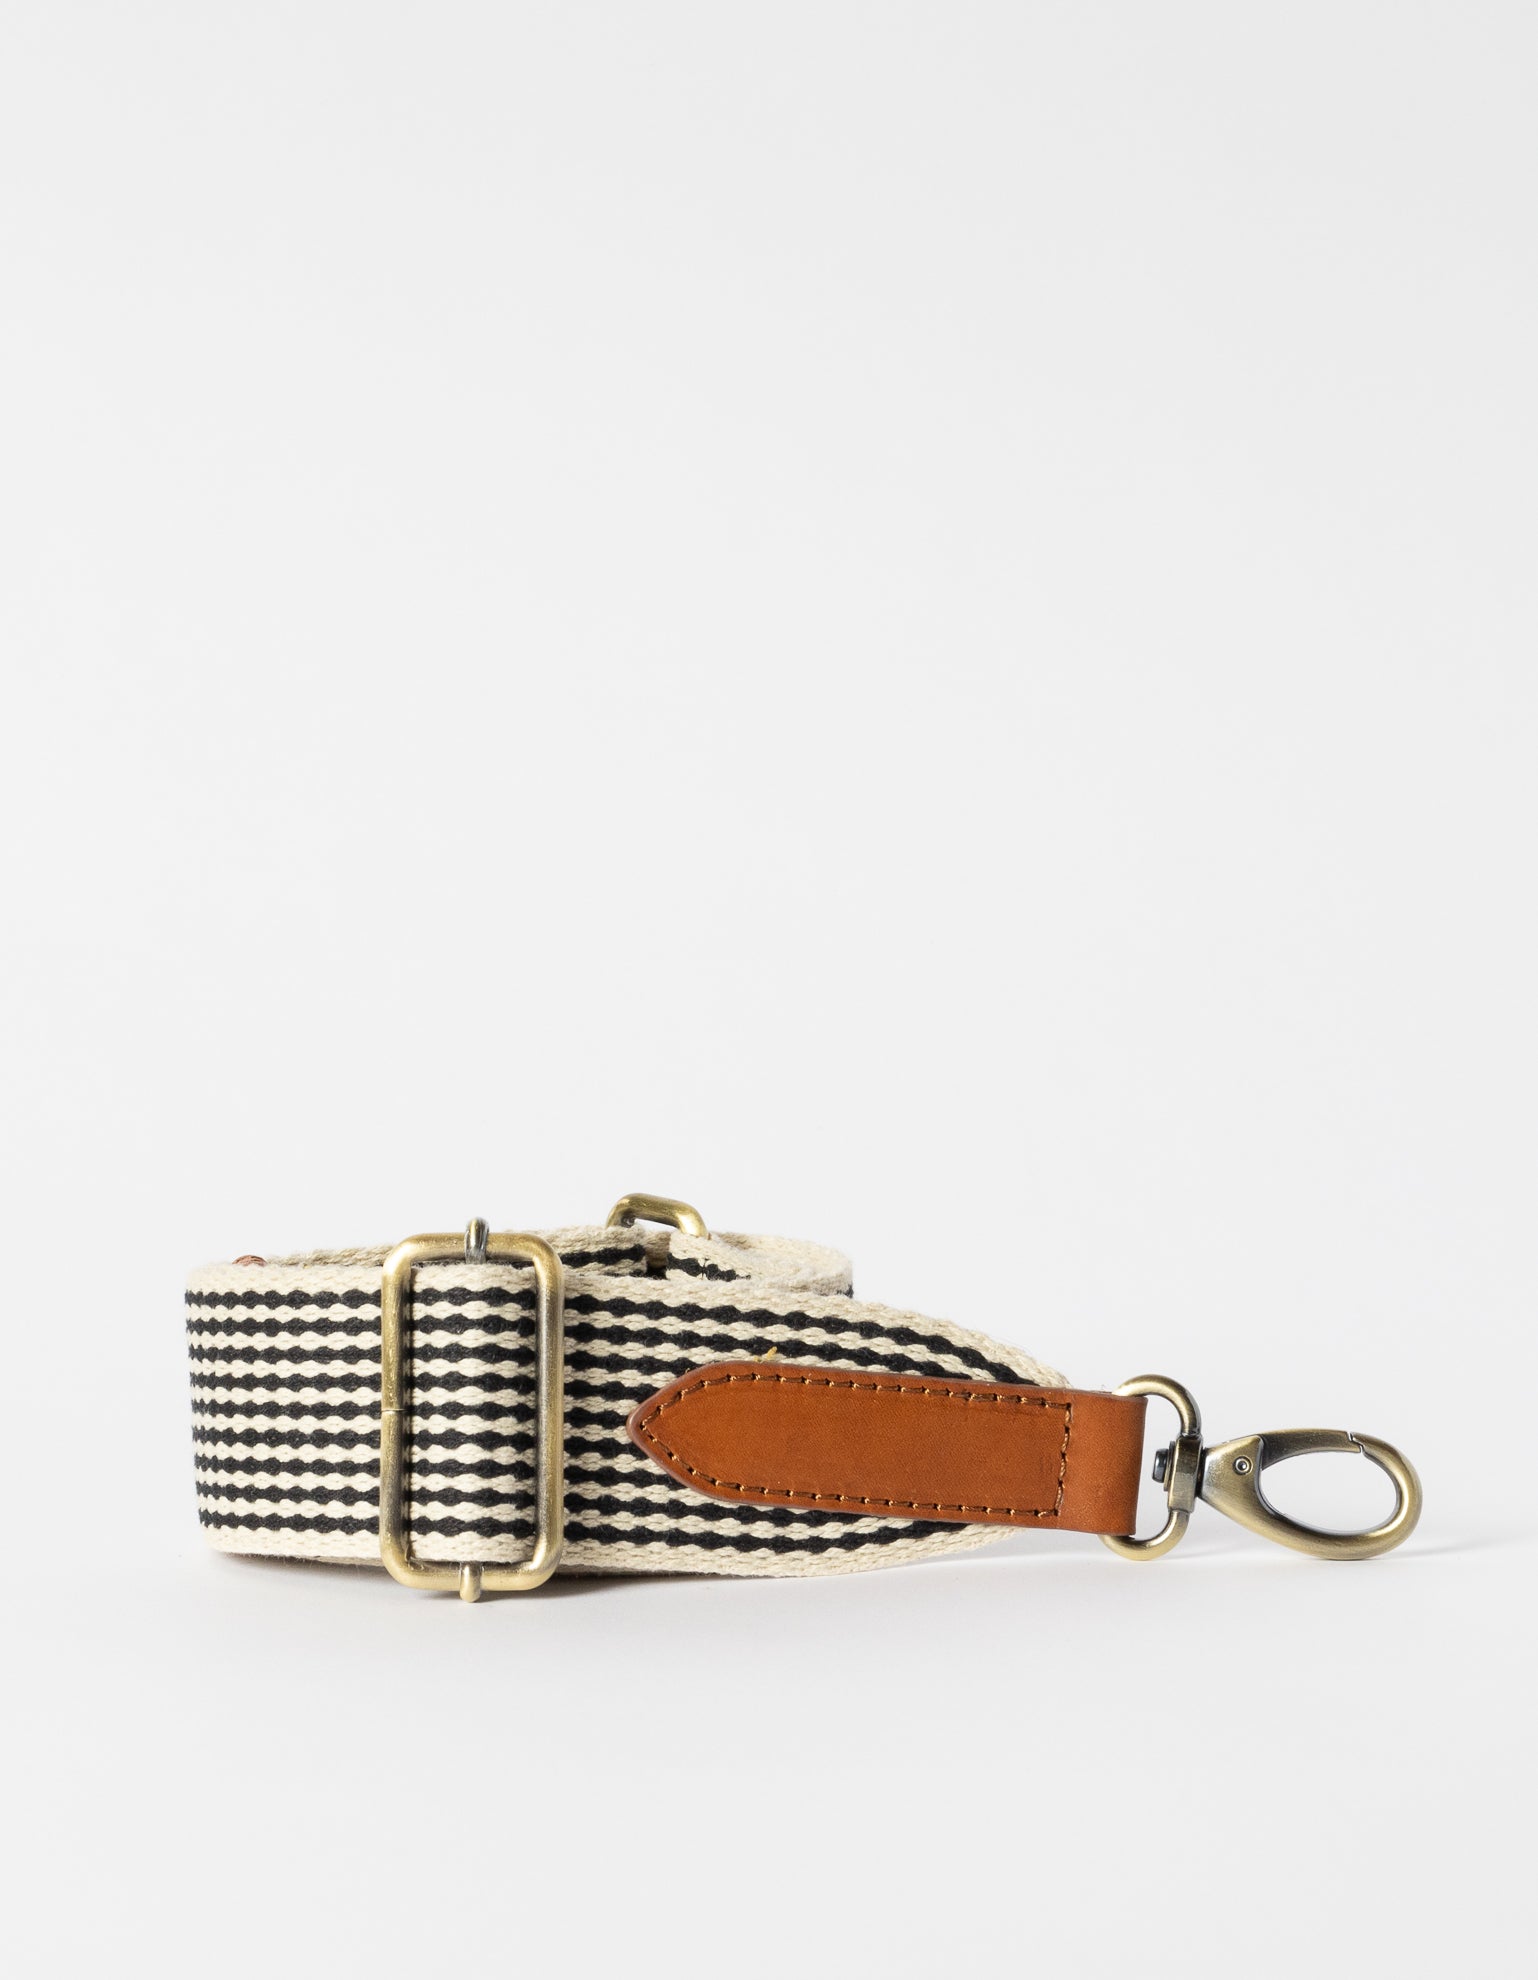 Webbing Strap Black Checkered with cognac Leather